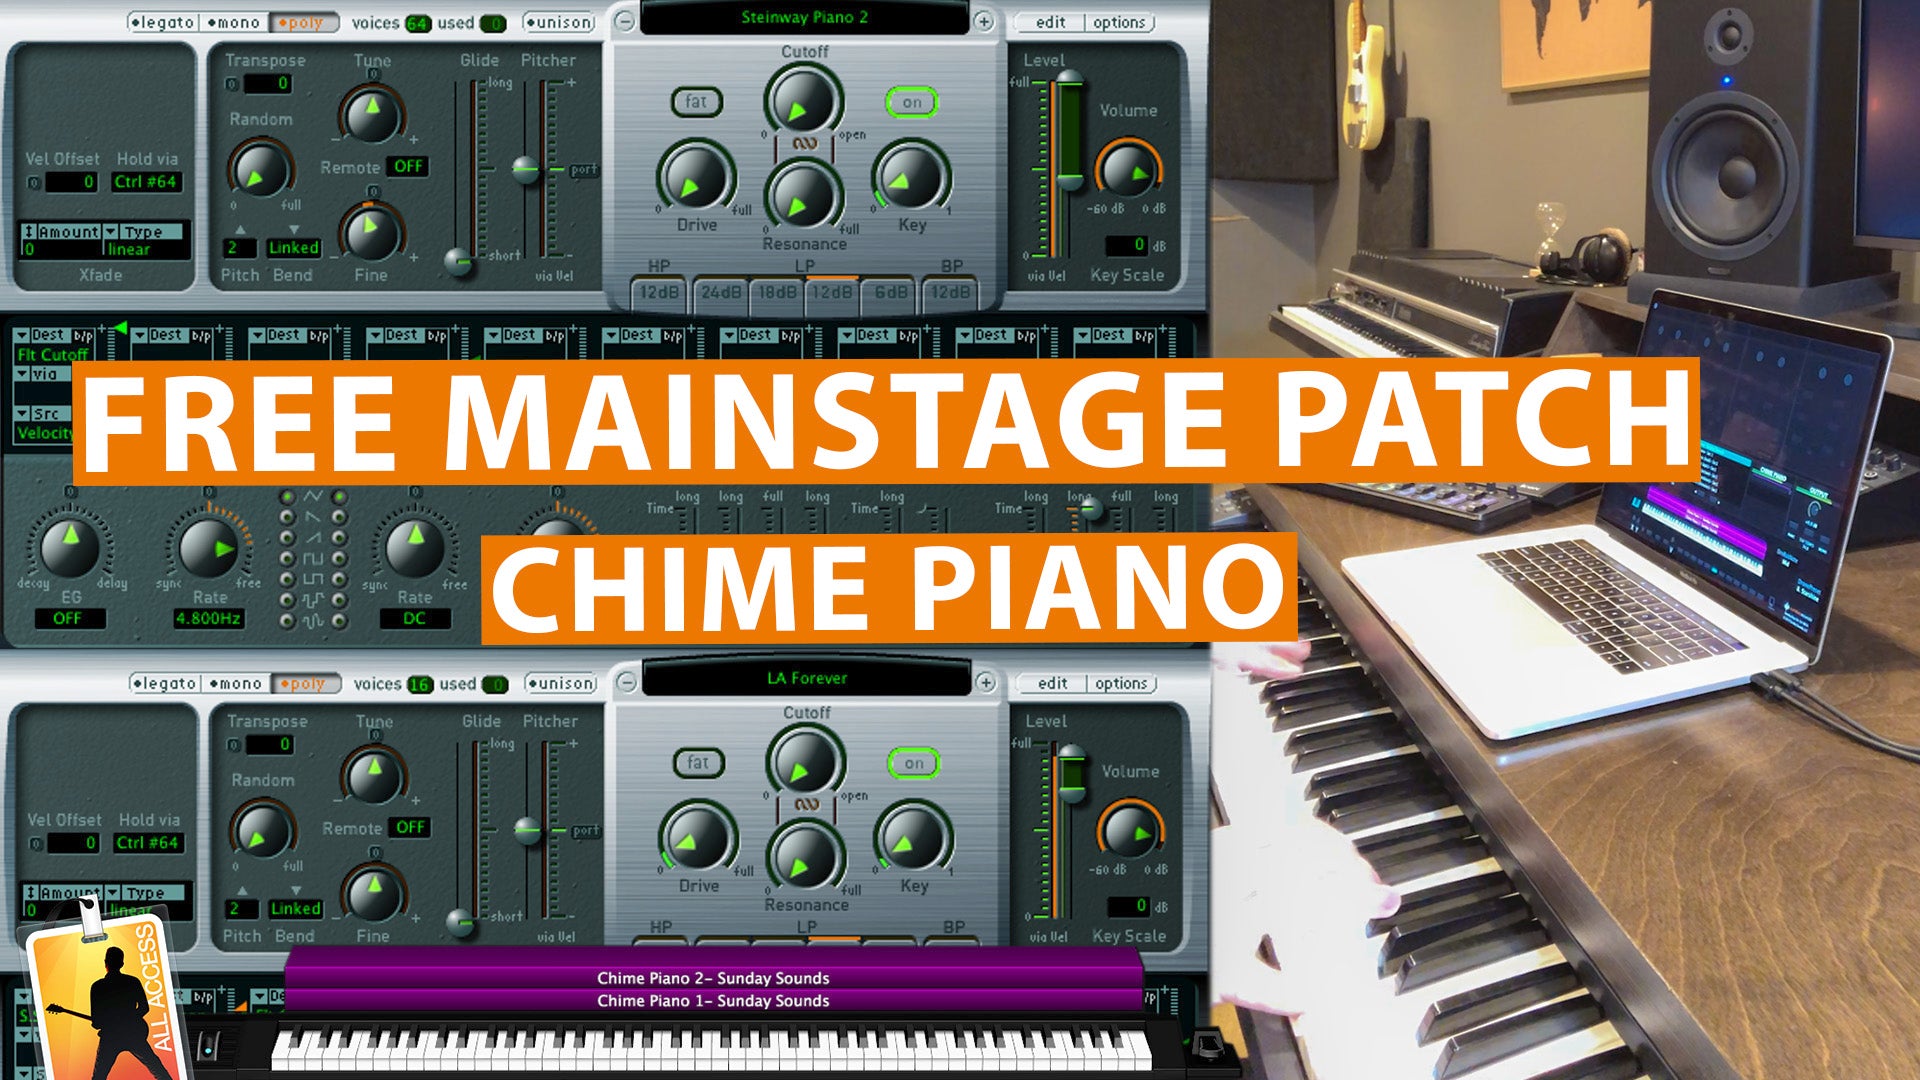 Free MainStage Worship Patch! - Chime Piano